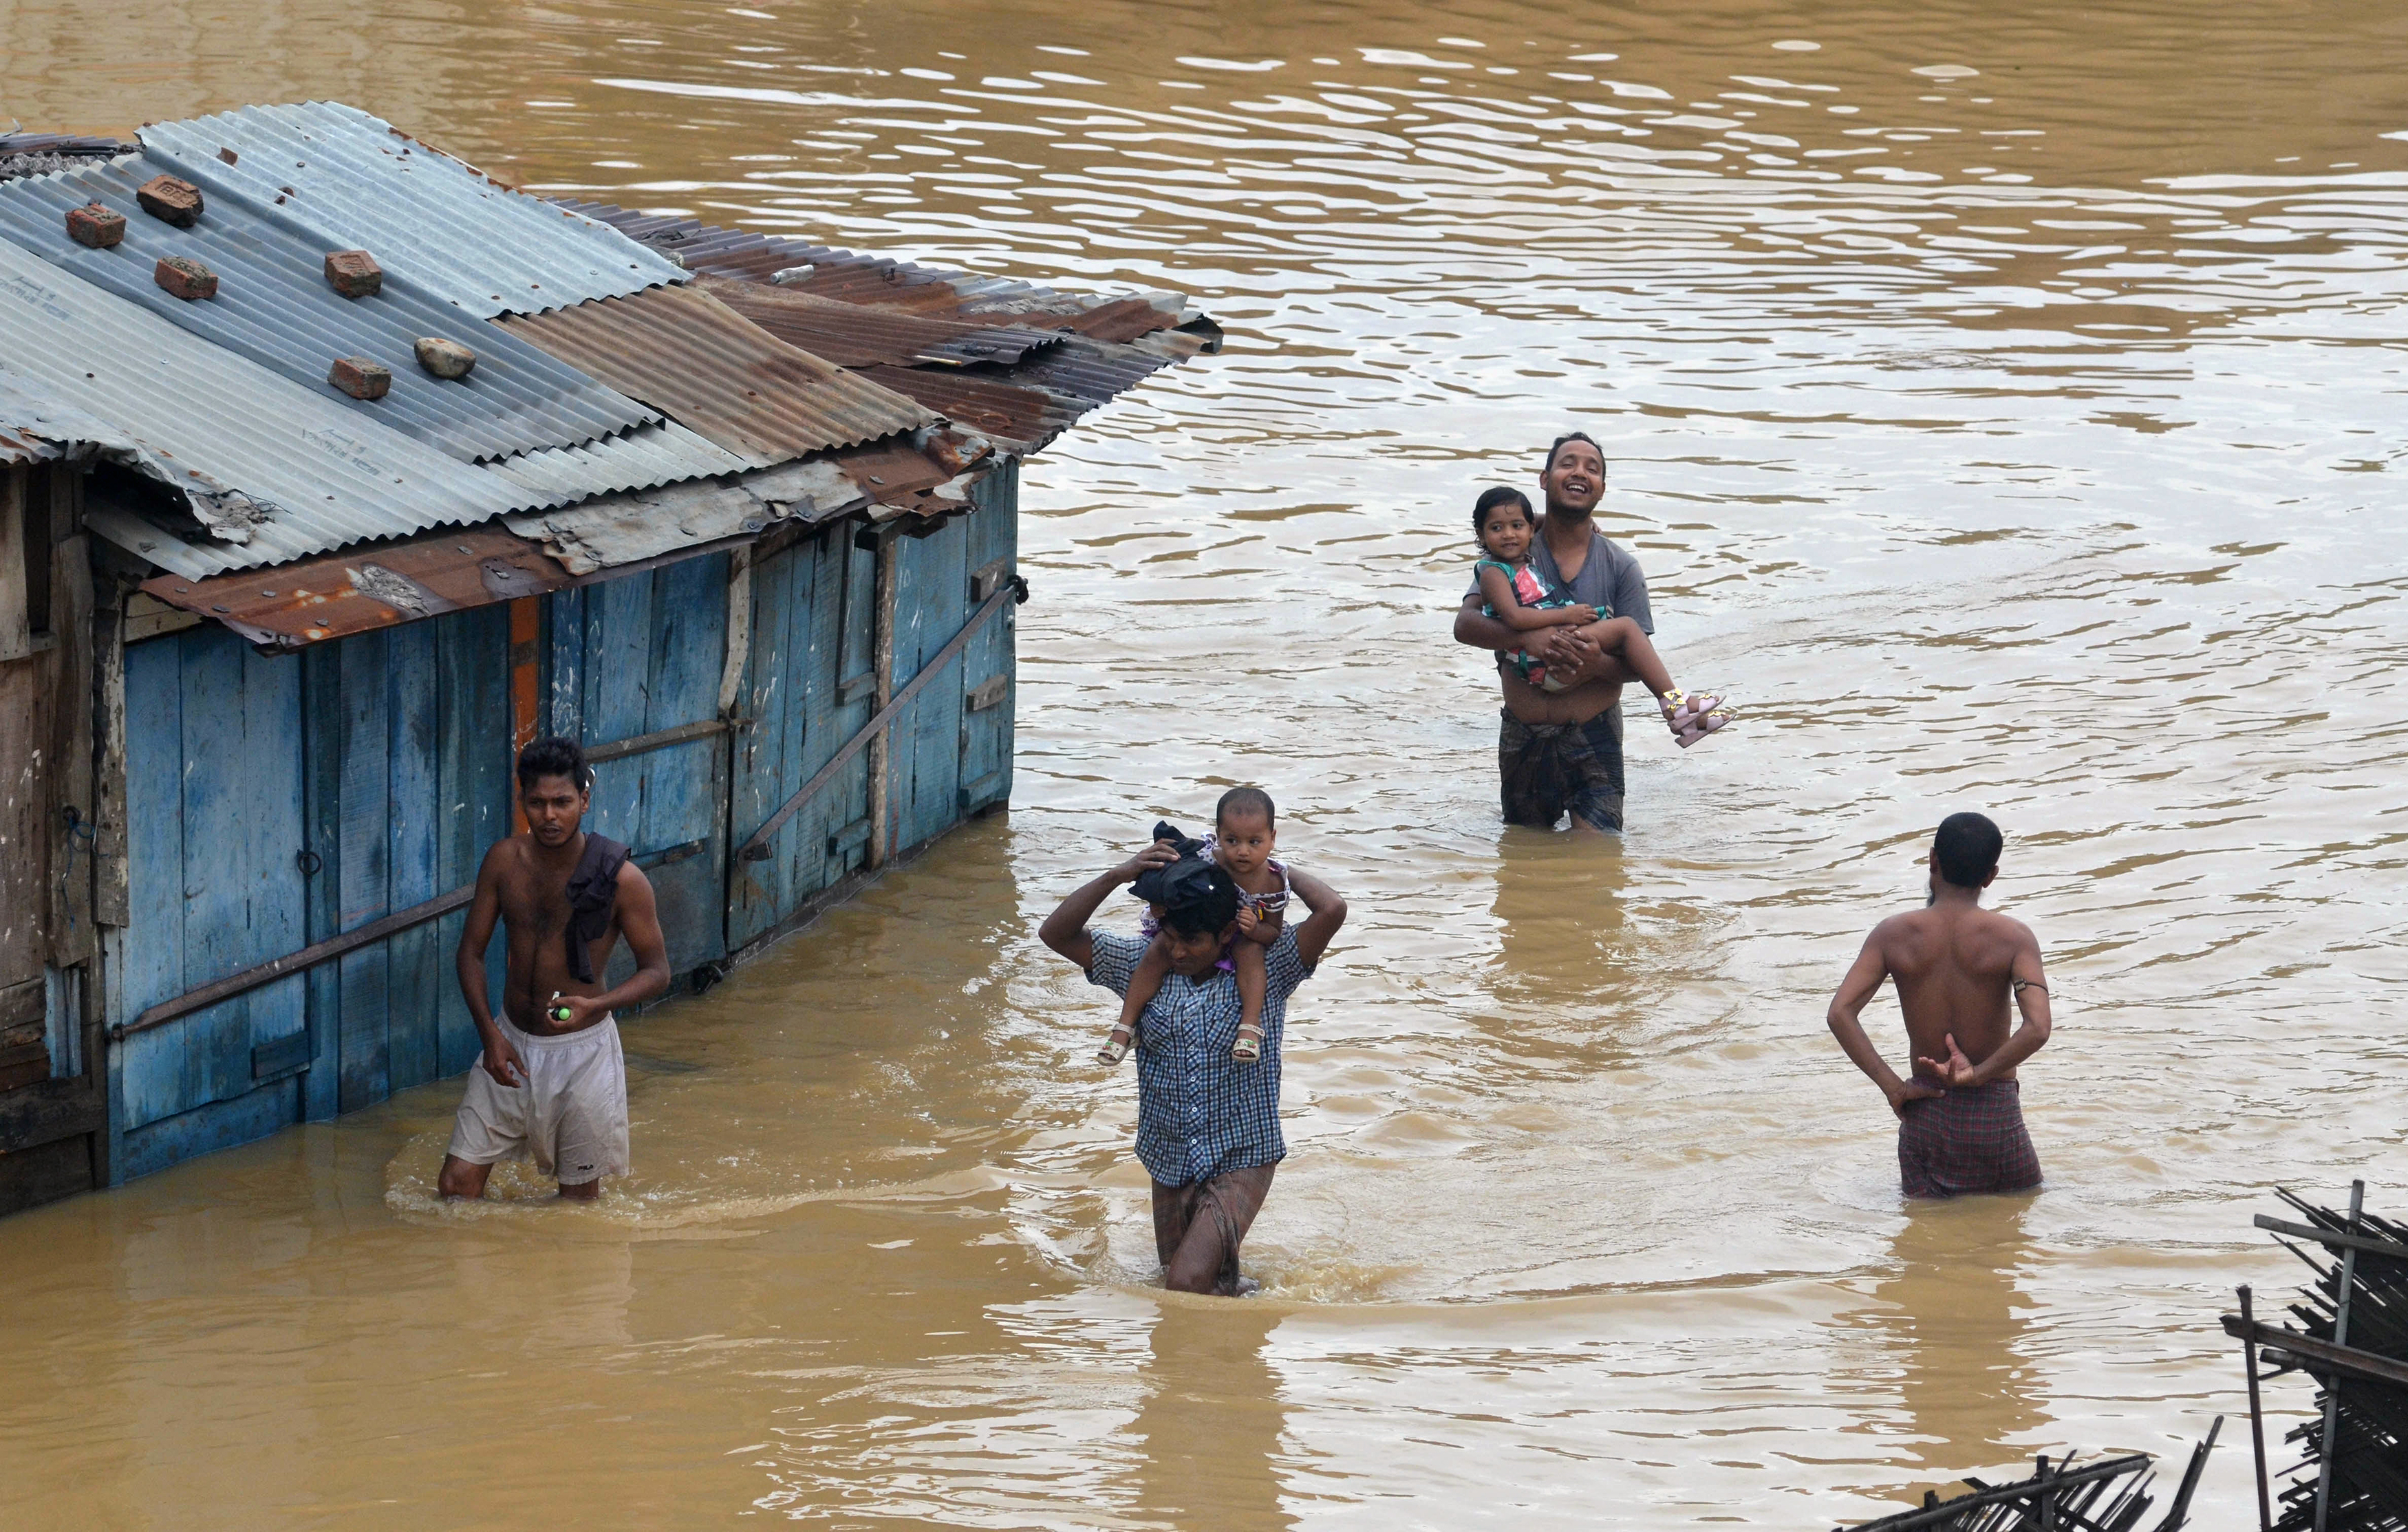 Residents wade through flood waters after heavy monsoon rain in Dimapur on June 28, 2016.  Thousands of people were flooded out of their homes in India's northeastern state of Nagaland following heavy monsoon rains. / AFP PHOTO / Caisii Mao